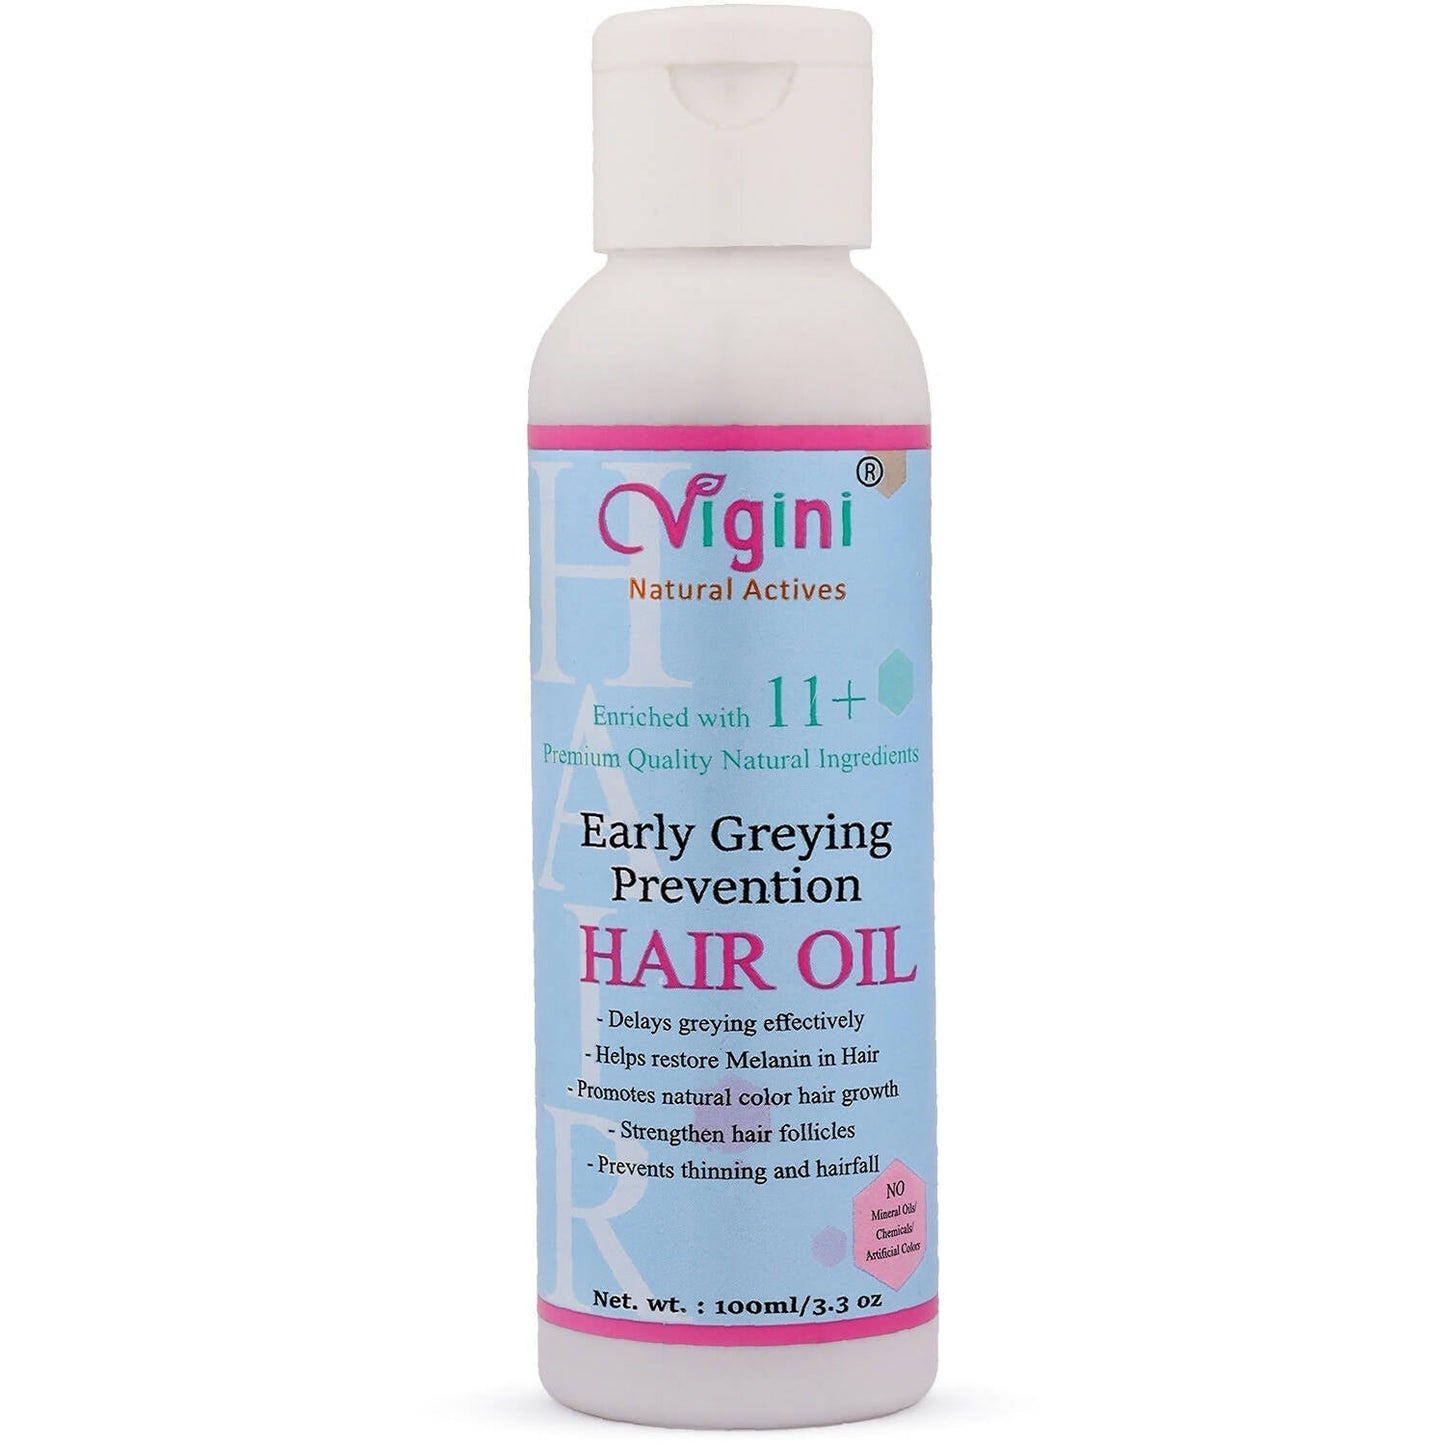 Vigini Early Anti Greying Hair Care Oil with Amla, Onion Seed Oil, Flaxseed Oil - BUDNEN